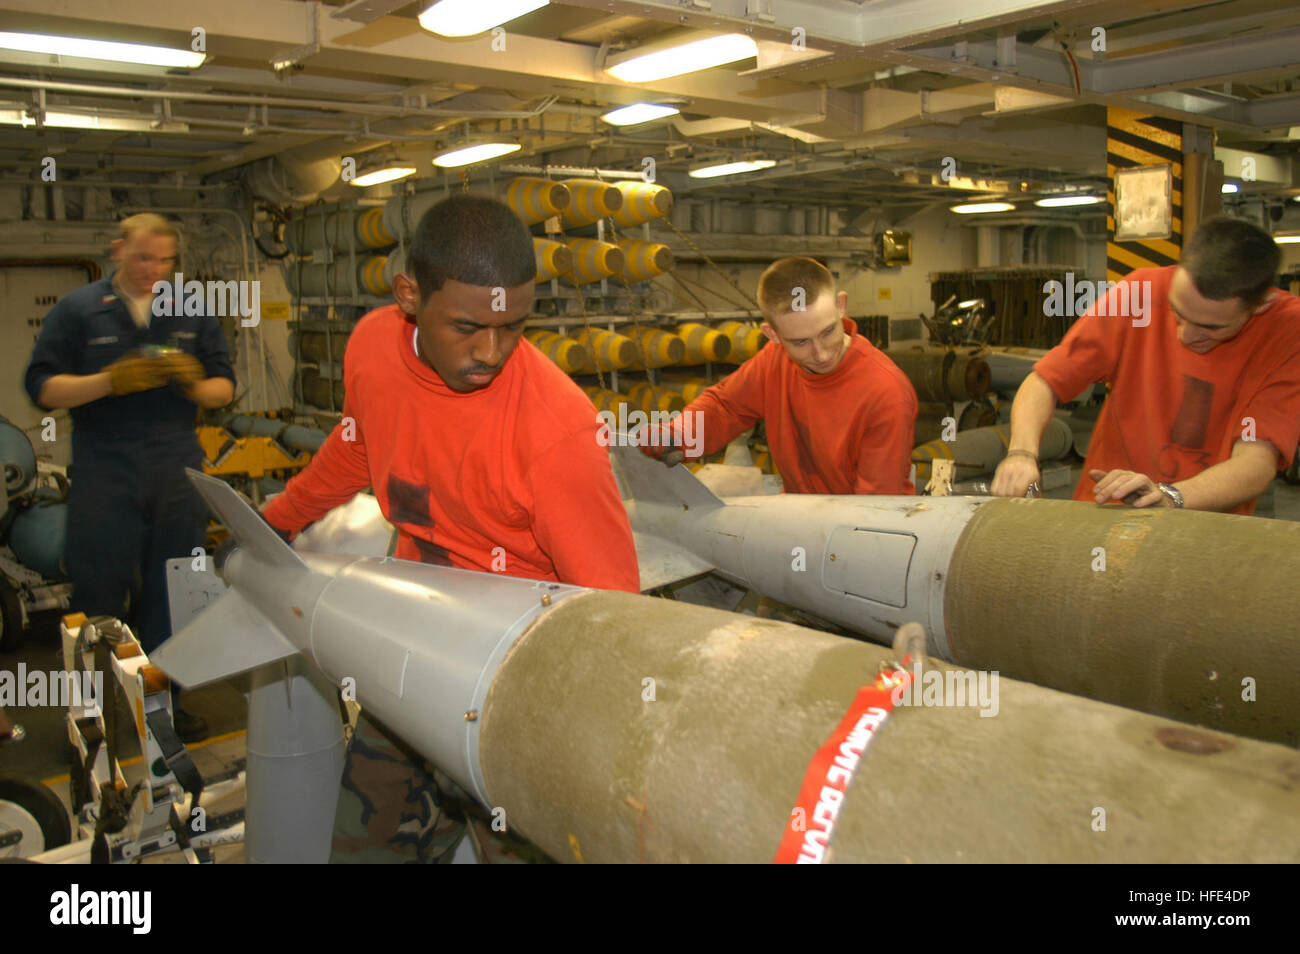 040926-N-2541H-002 Arabian Gulf (Sept. 26, 2004) - Aviation Ordnanceman Airman Charles Robinson of National City, Calif., attaches a conical fin to a MK-83 general-purpose bomb in the forward bomb assembly aboard the conventionally powered aircraft carrier USS John F. Kennedy (CV 67). Kennedy and Carrier Air Wing Seventeen (CVW-17) are operating in the 5th Fleet area of responsibility (AOR) in support of Operation Iraqi Freedom (OIF).  Units attached to the Kennedy Carrier Strike Group (CSG) are working closely with Multi-National Corps-Iraq and Iraqi forces to bring stability to the sovereign Stock Photo